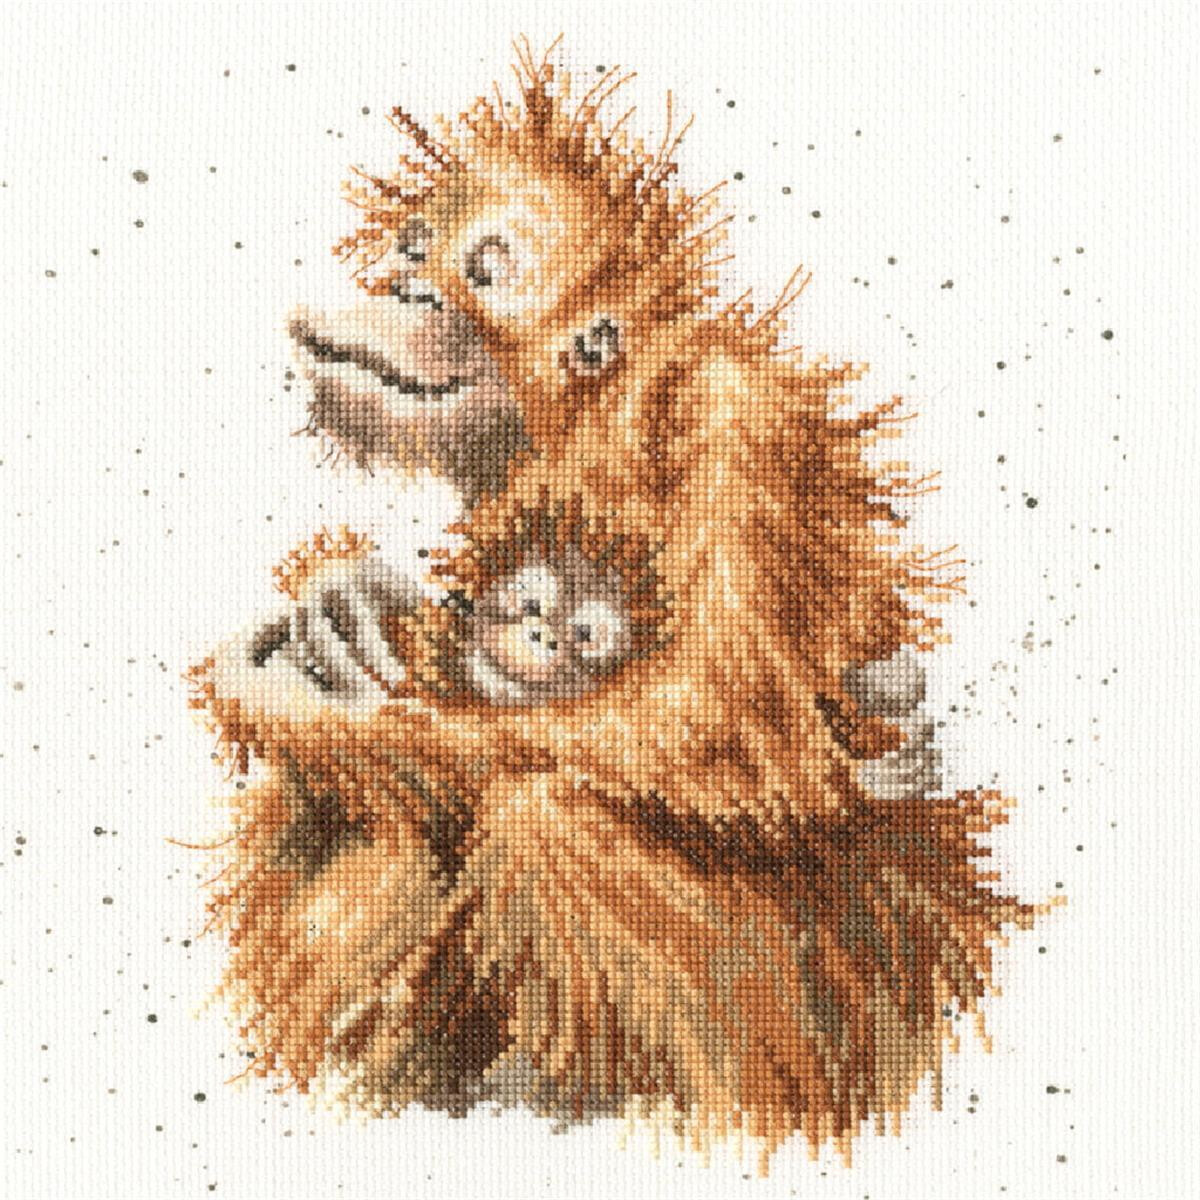 Detailed embroidery pack showing a mother orangutan...